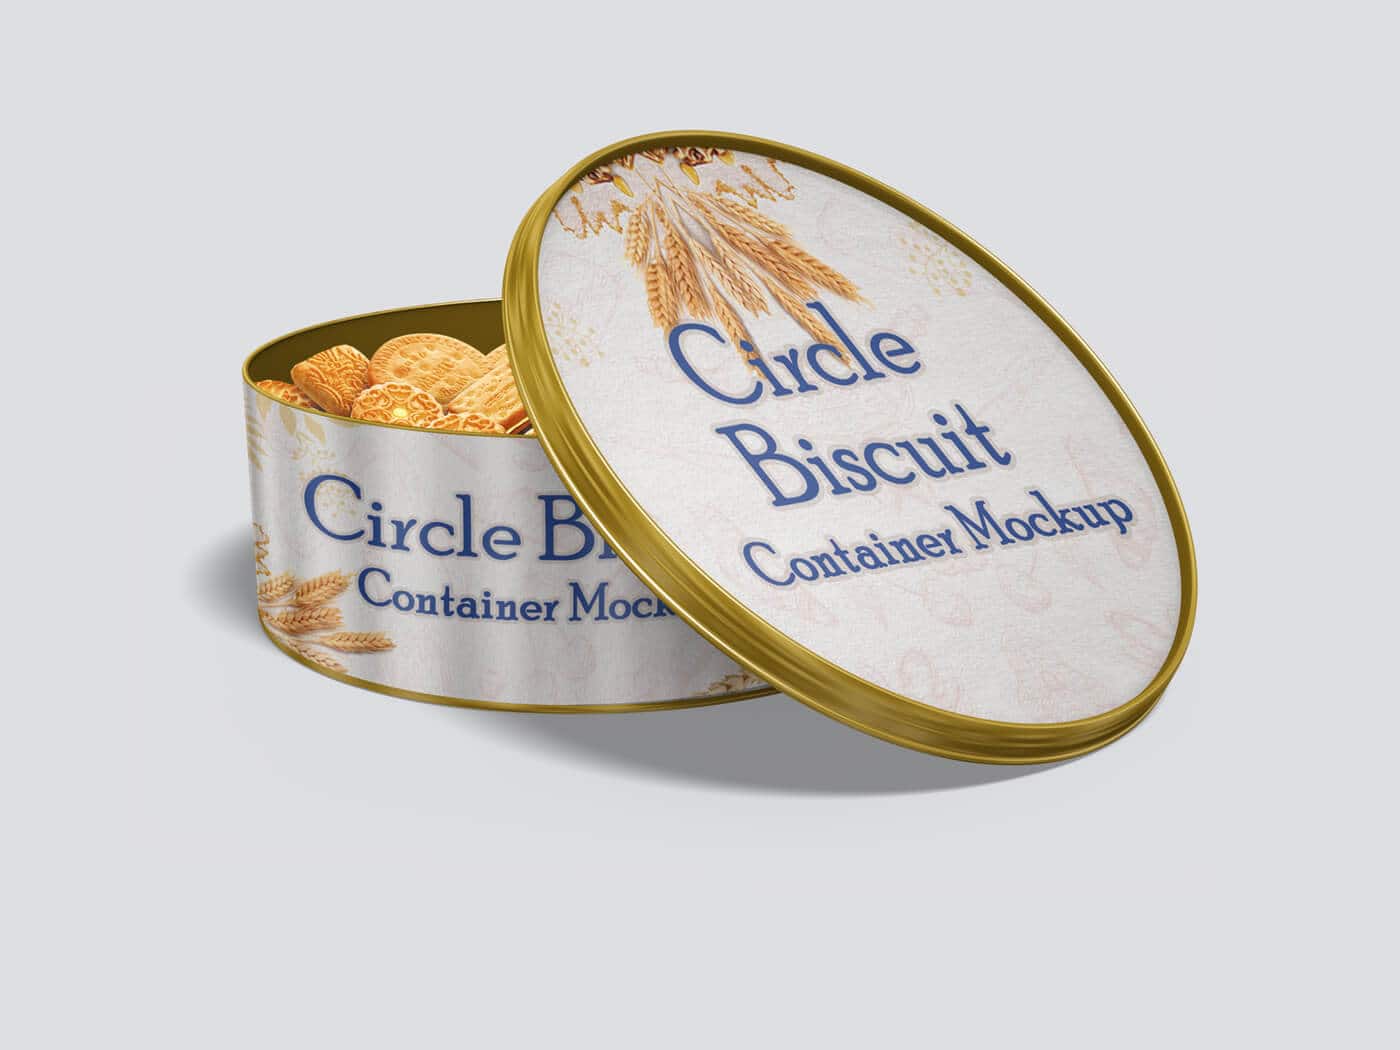  Circle-Biscuit-and-Cookies-Tin-Container-Mockup-02 